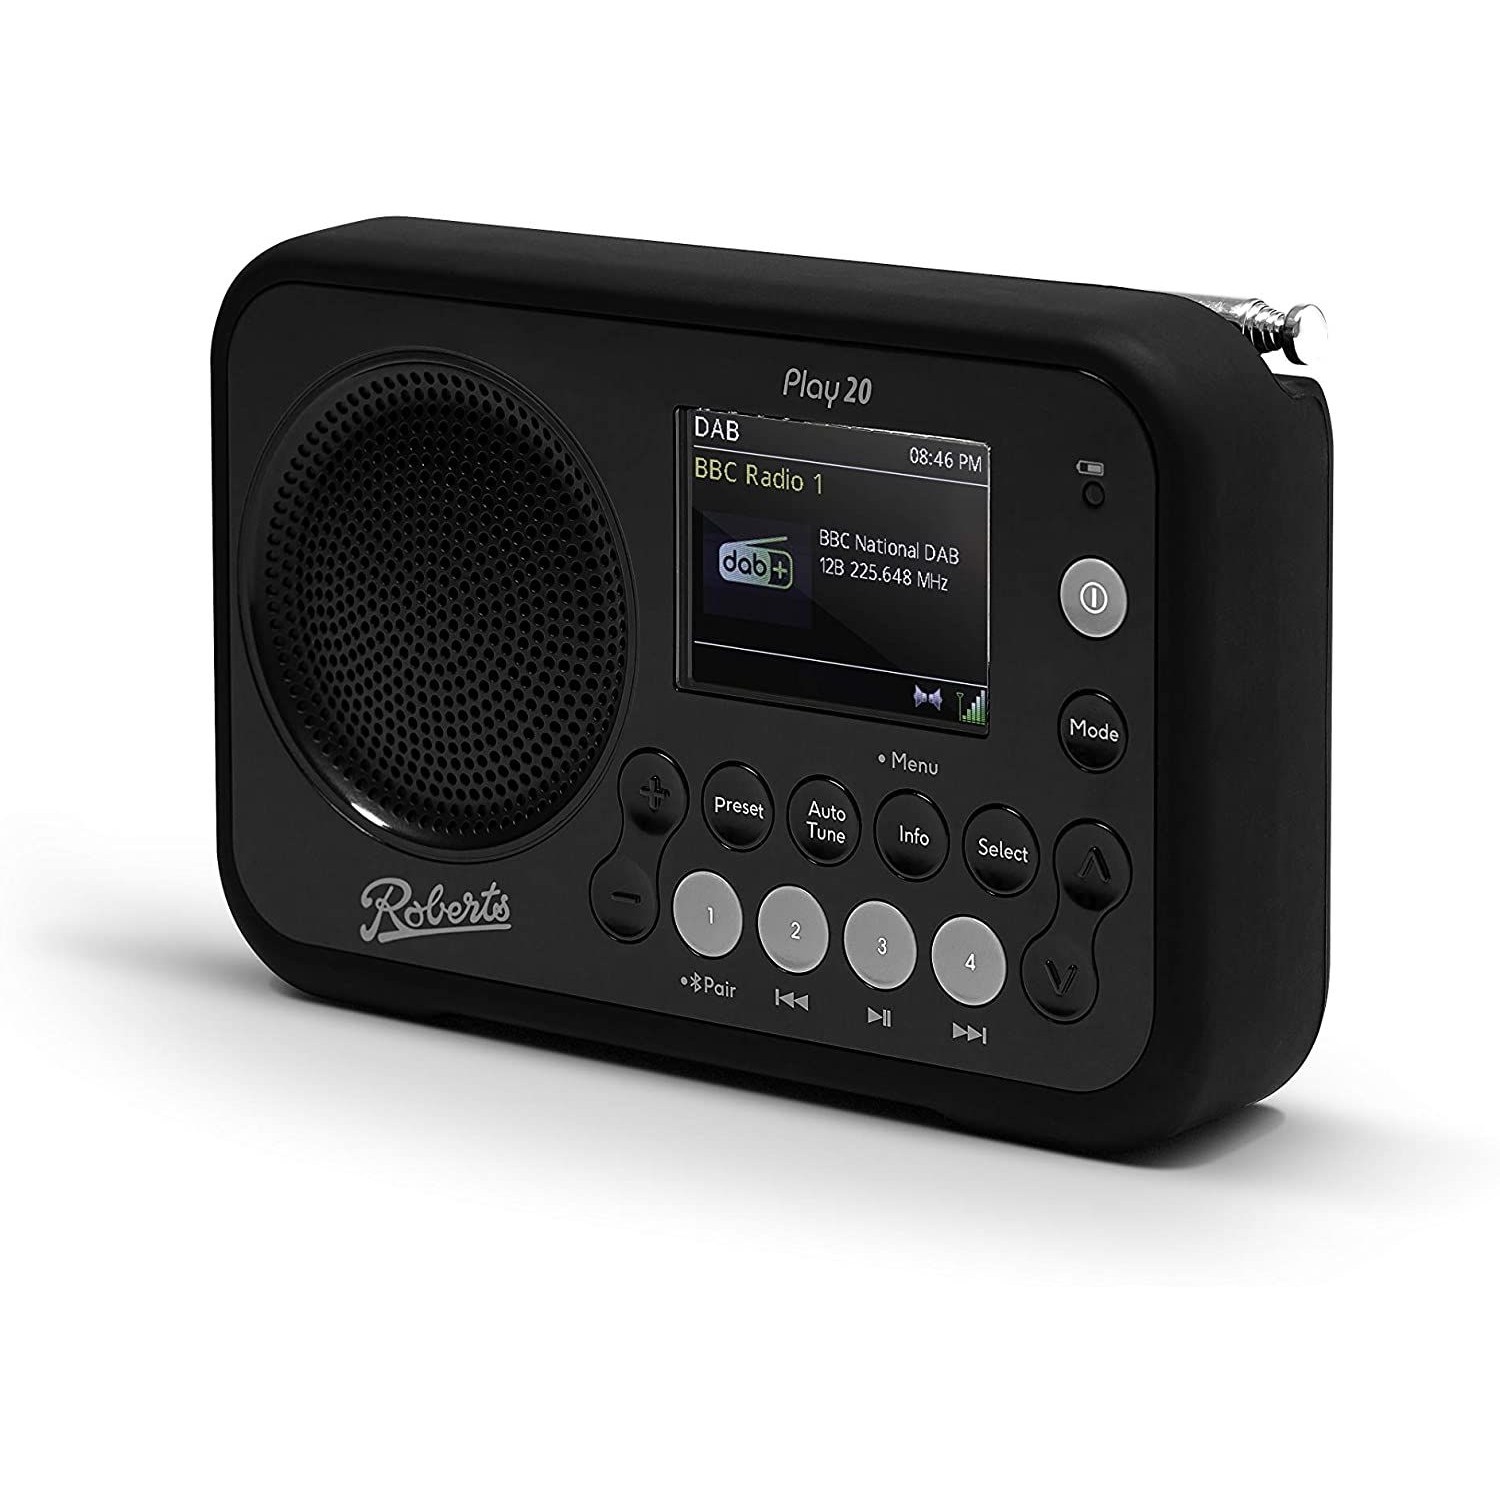 Roberts DAB / DAB+ / FM RDS digital radio/ TFT colour display/ Bluetooth  and with rubber bumper. - Bek's Electrical